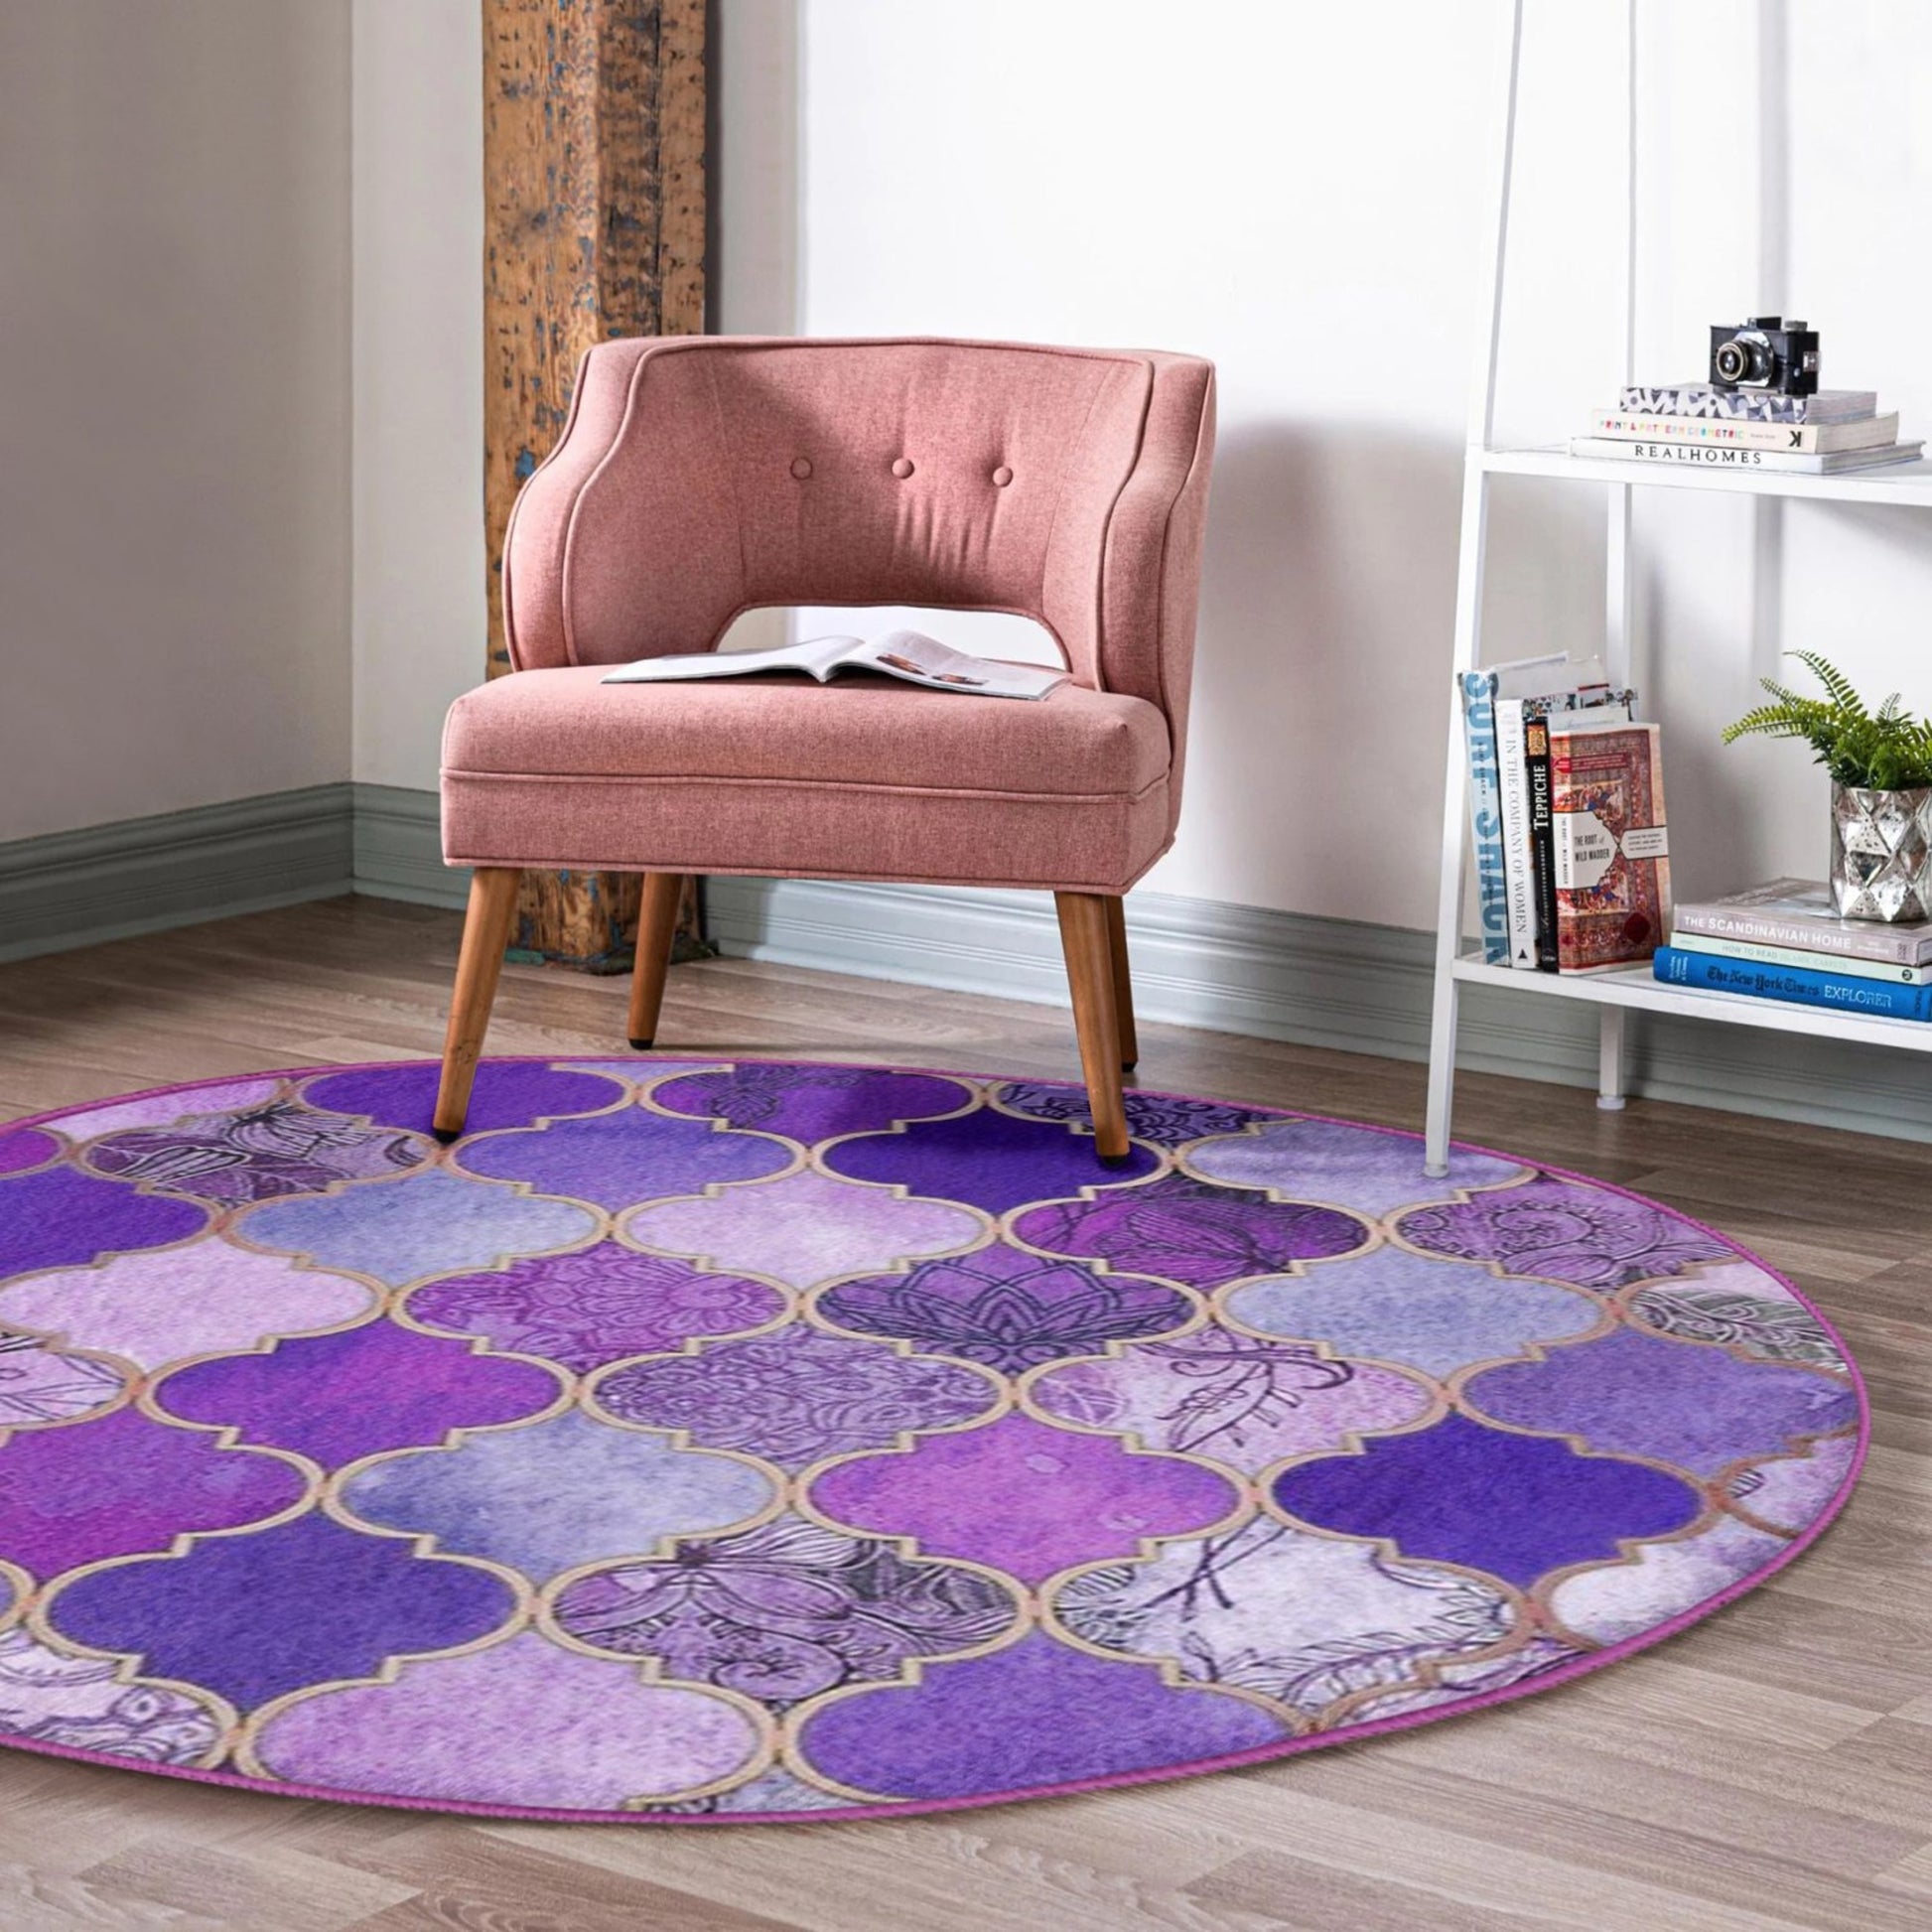 Round Patterned Floor Rug - Stylish Living Room Accent